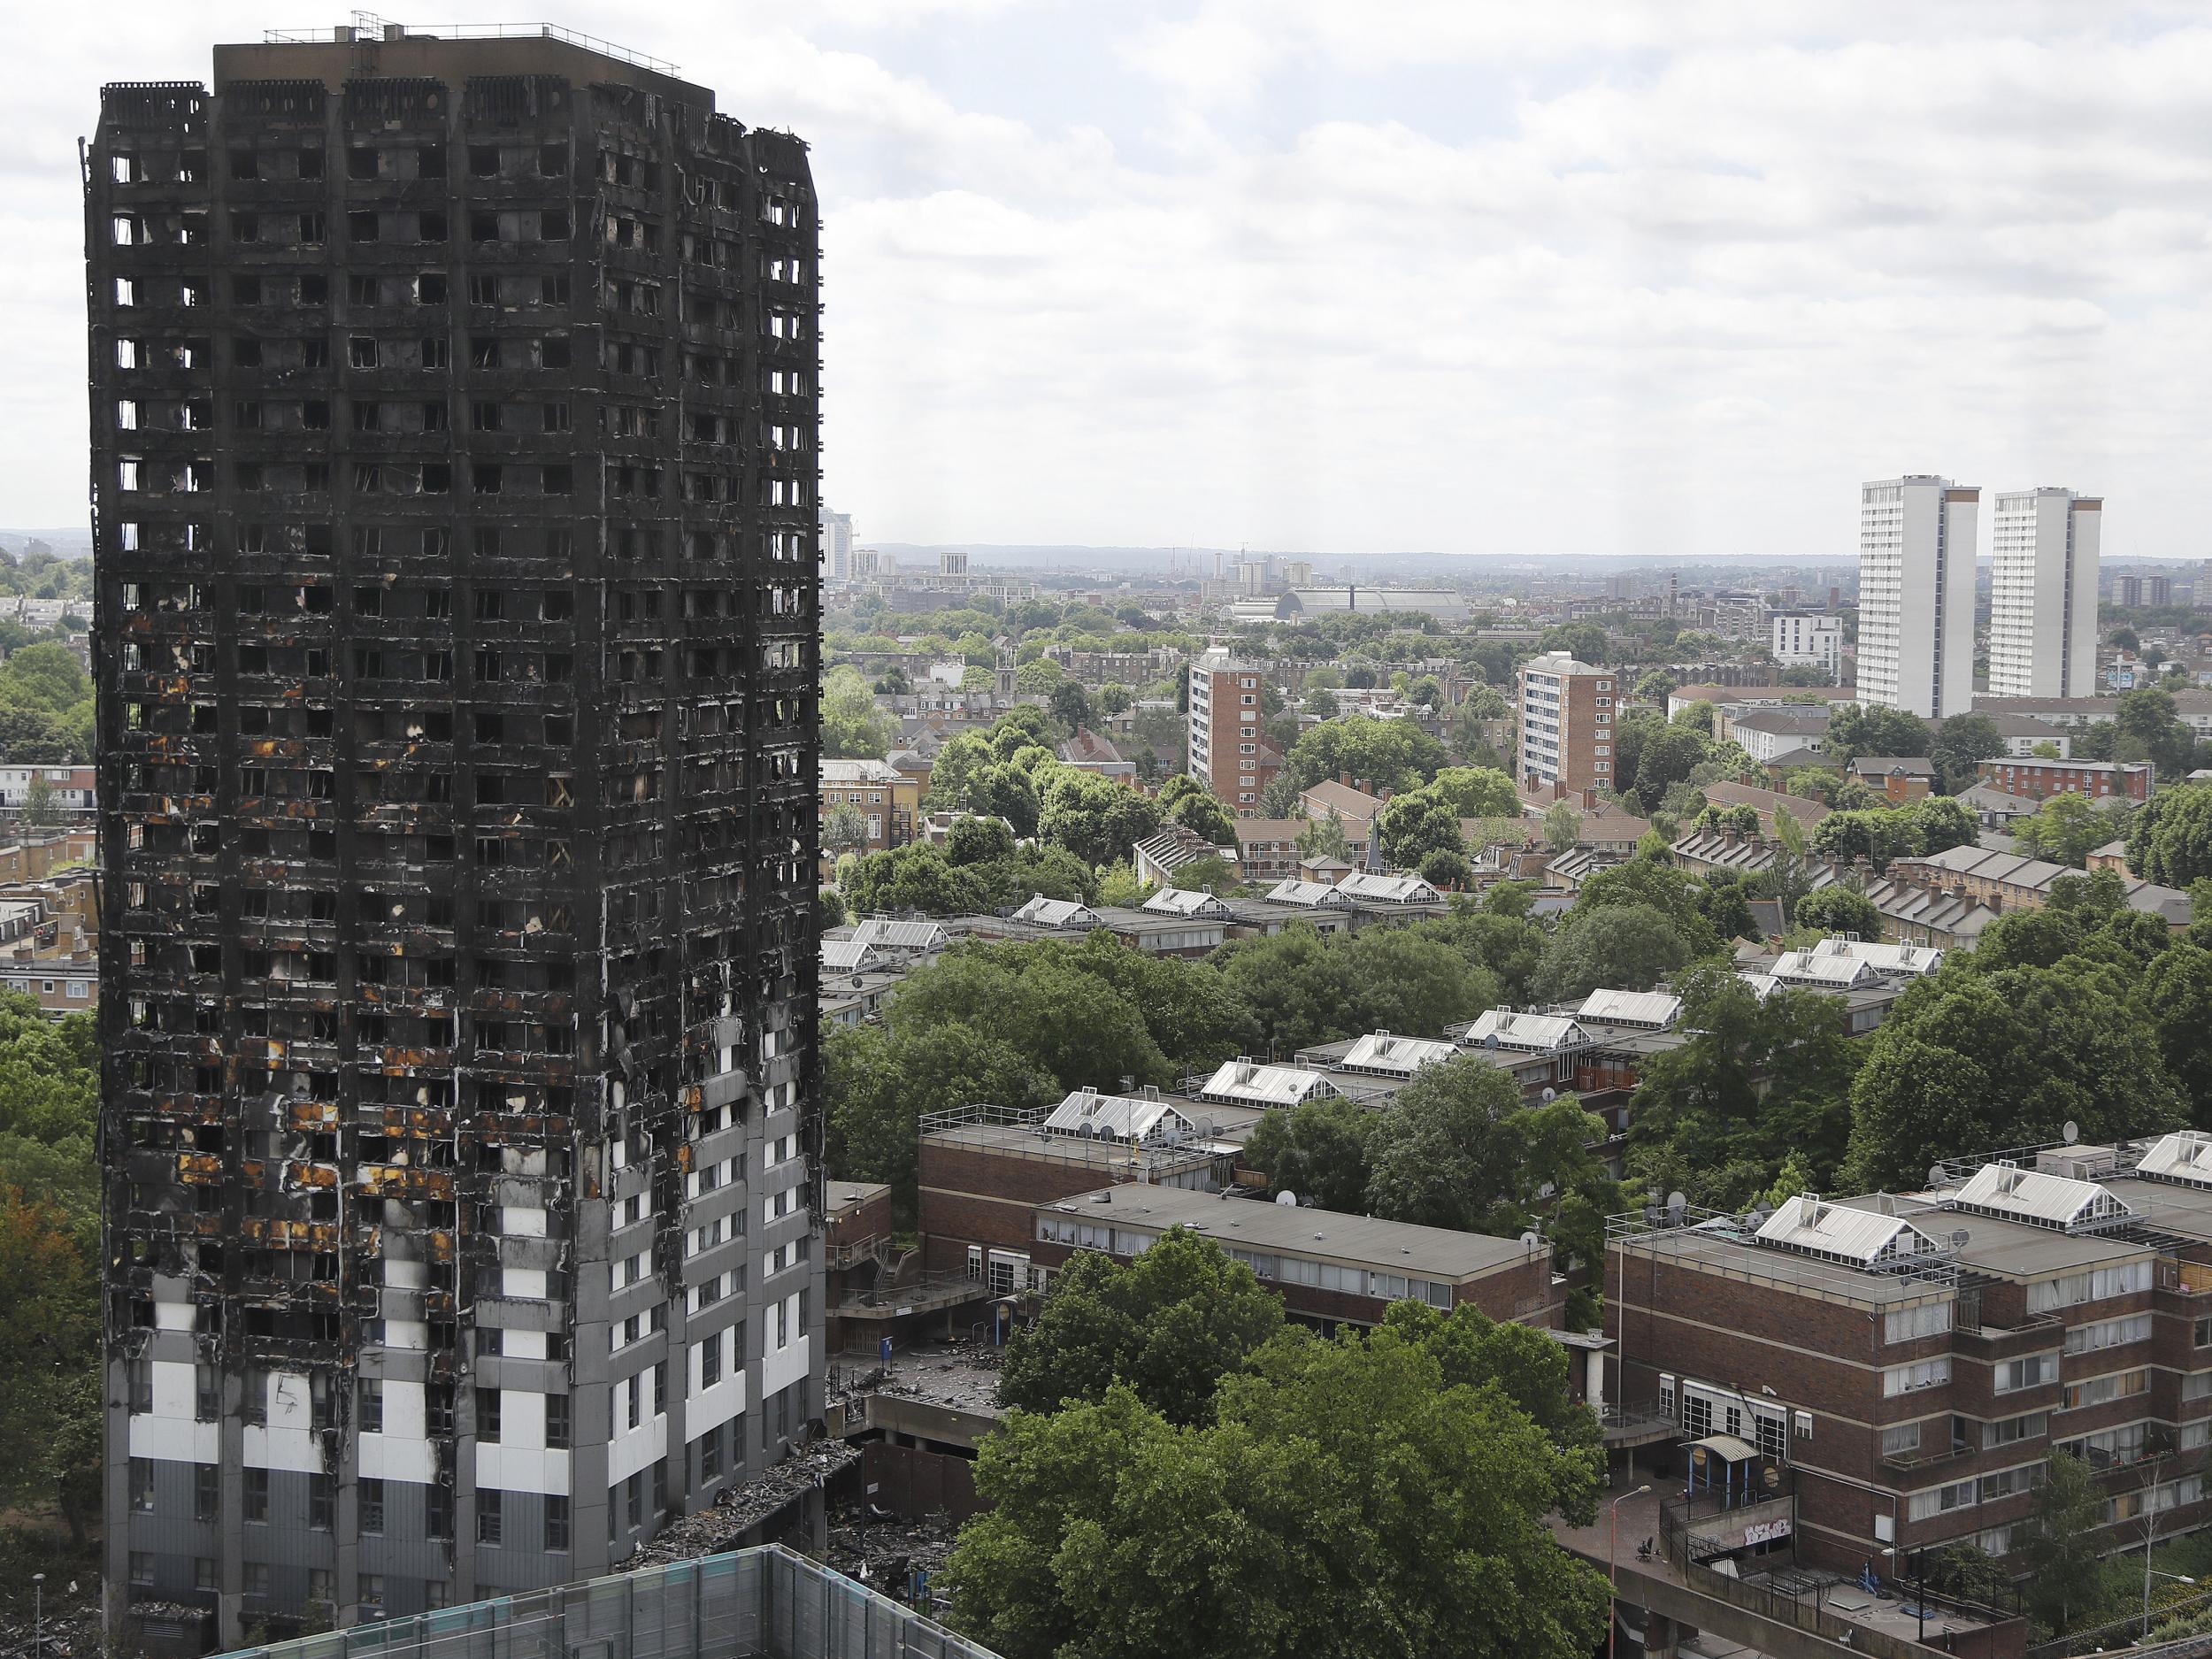 The Department for Communities and Local Government has told councils to identify private buildings fitted with cladding